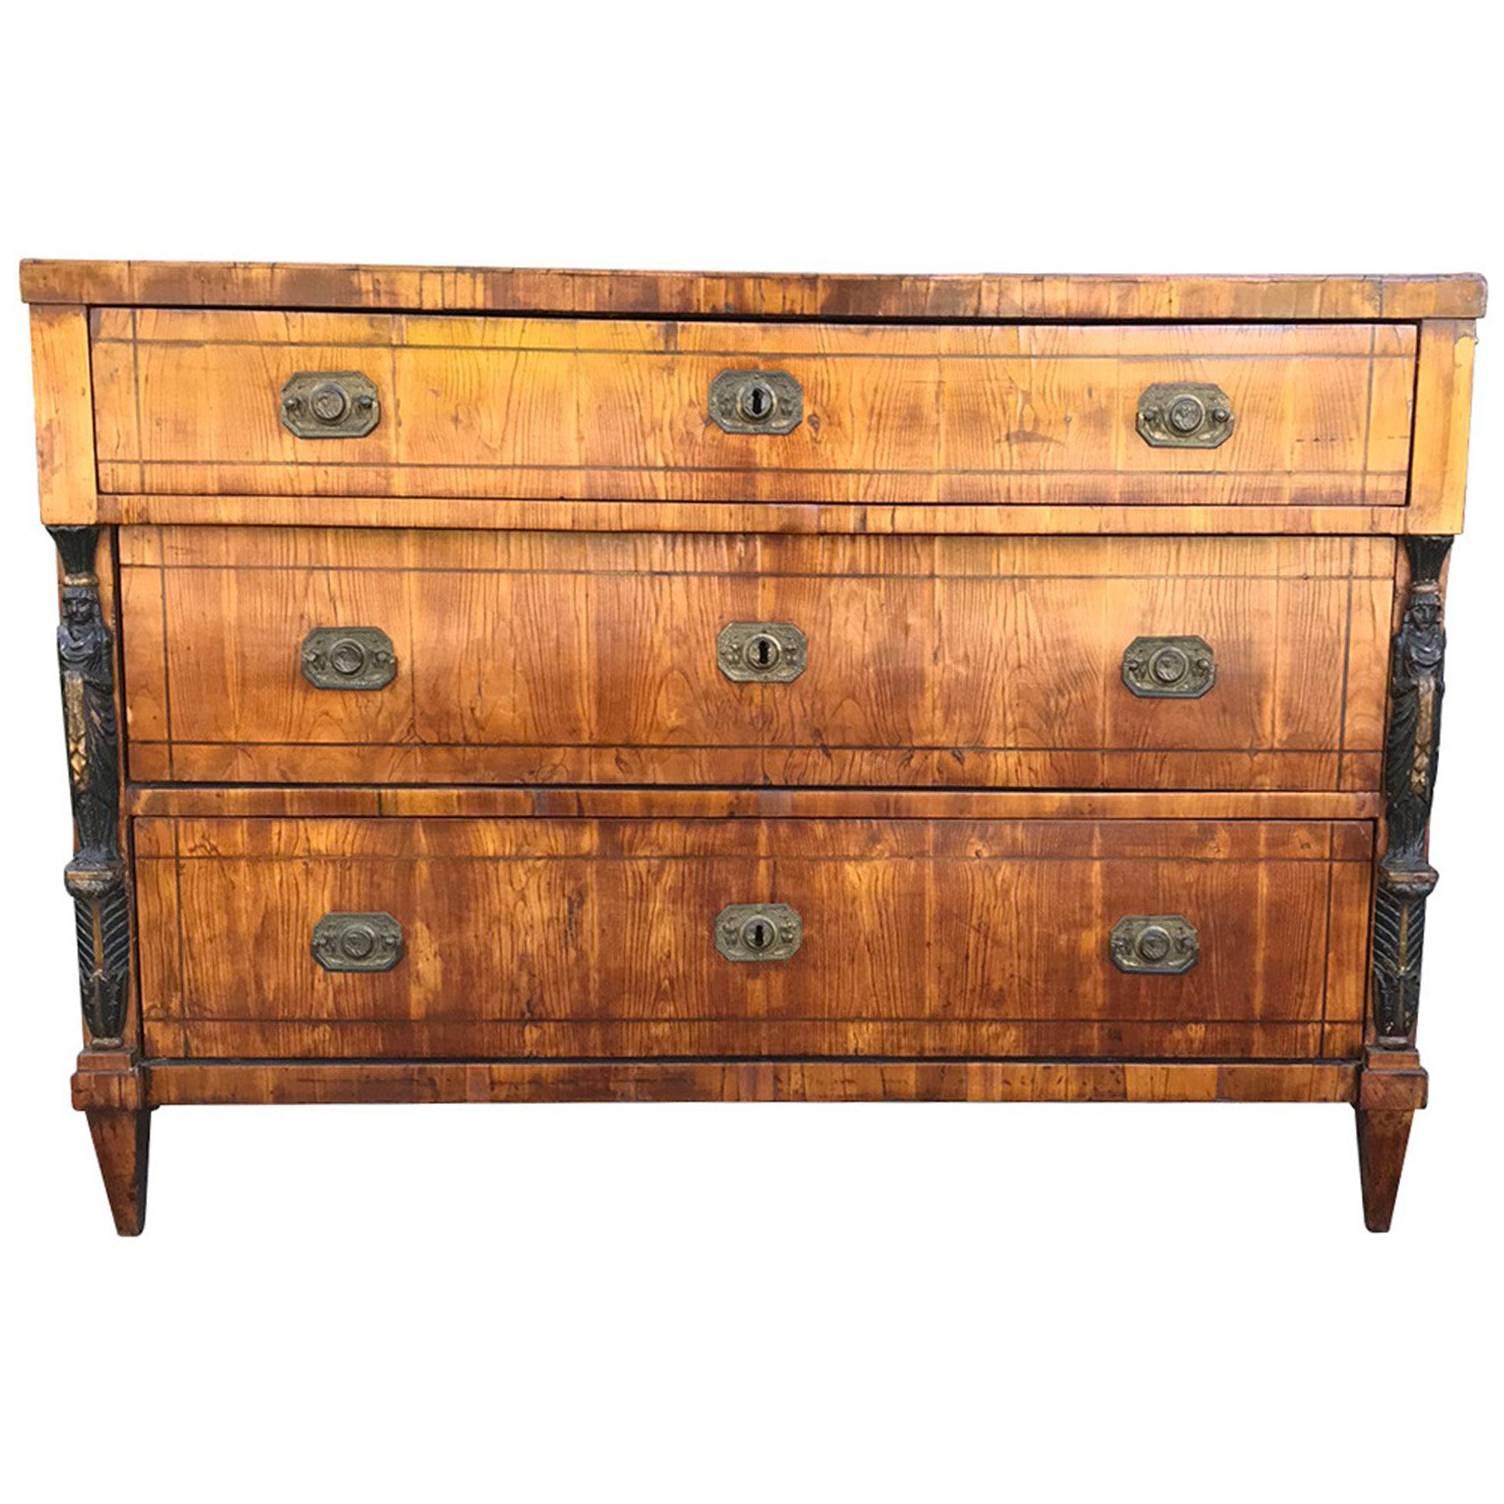 Neoclassical Three-Drawer Chest, Possibly Elm, circa 1820